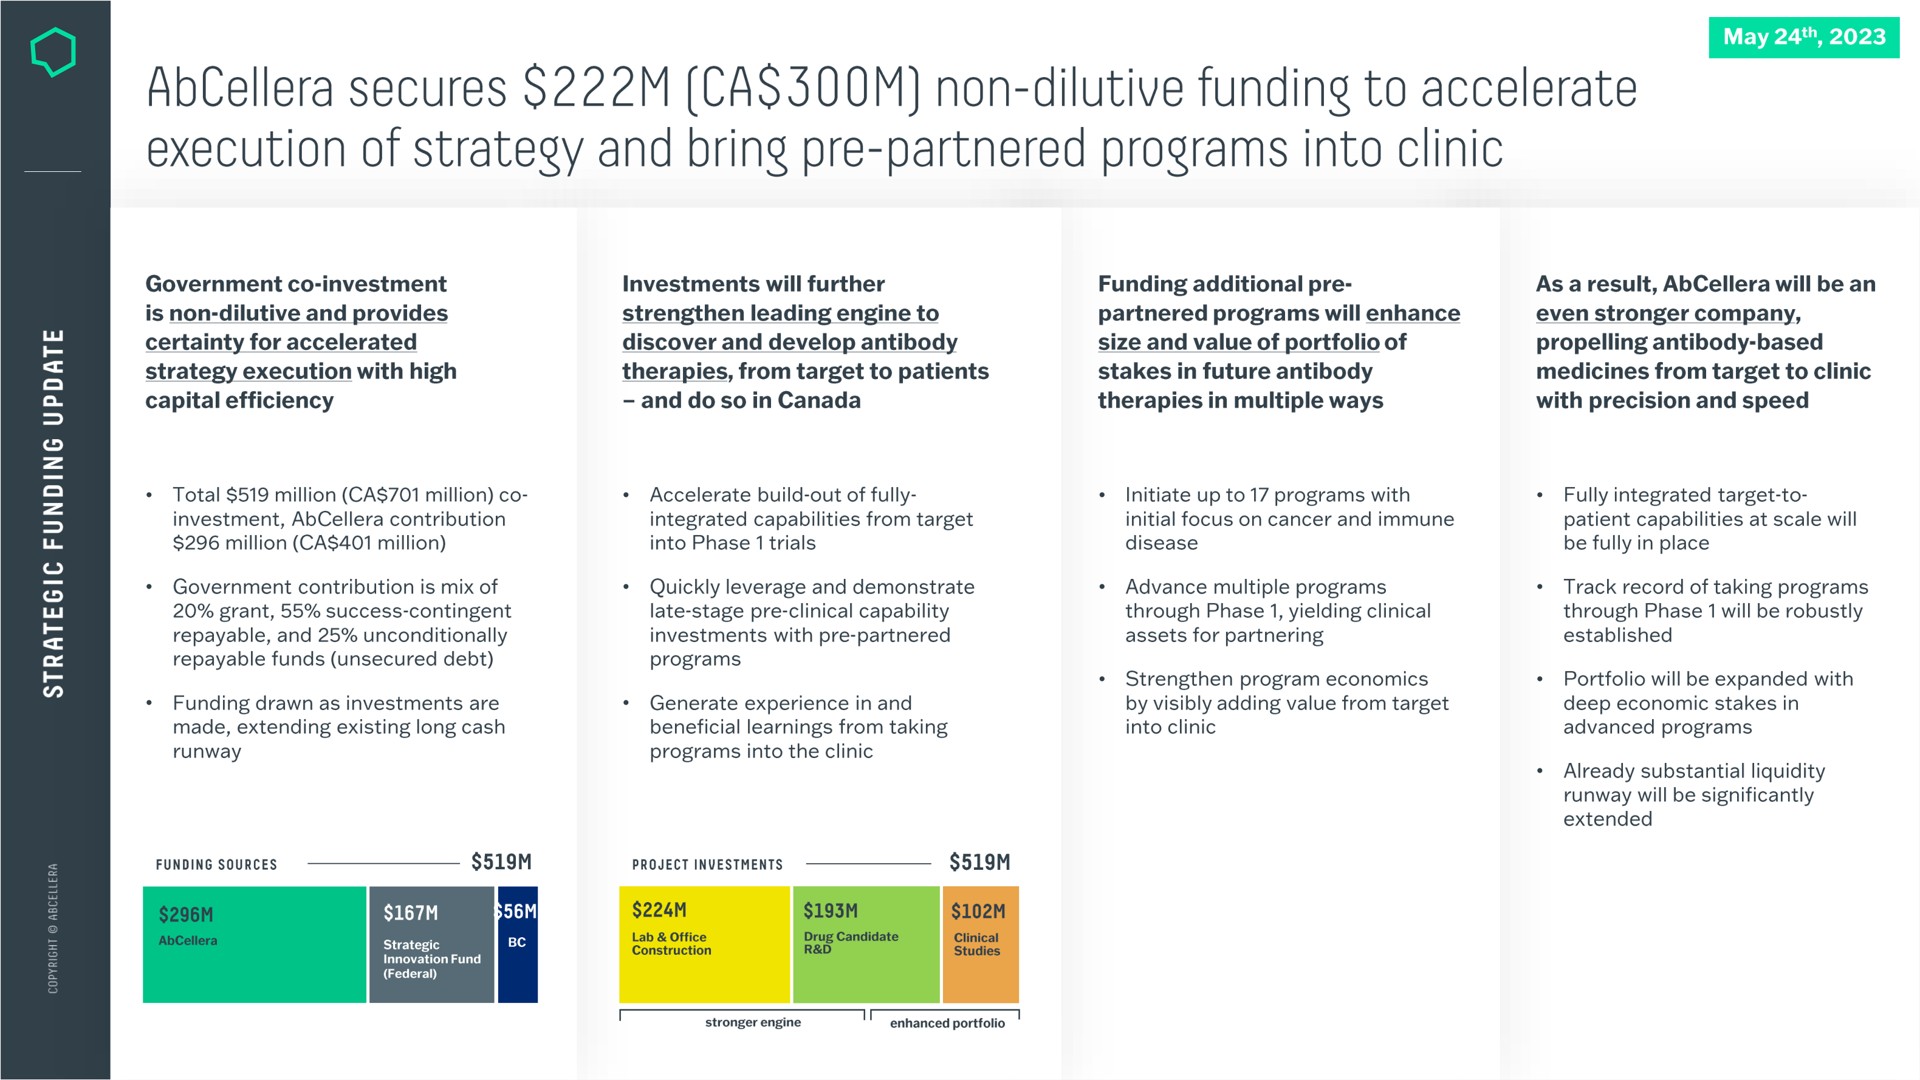 secures cas non dilutive funding to accelerate execution of strategy and bring partnered programs into clinic | AbCellera